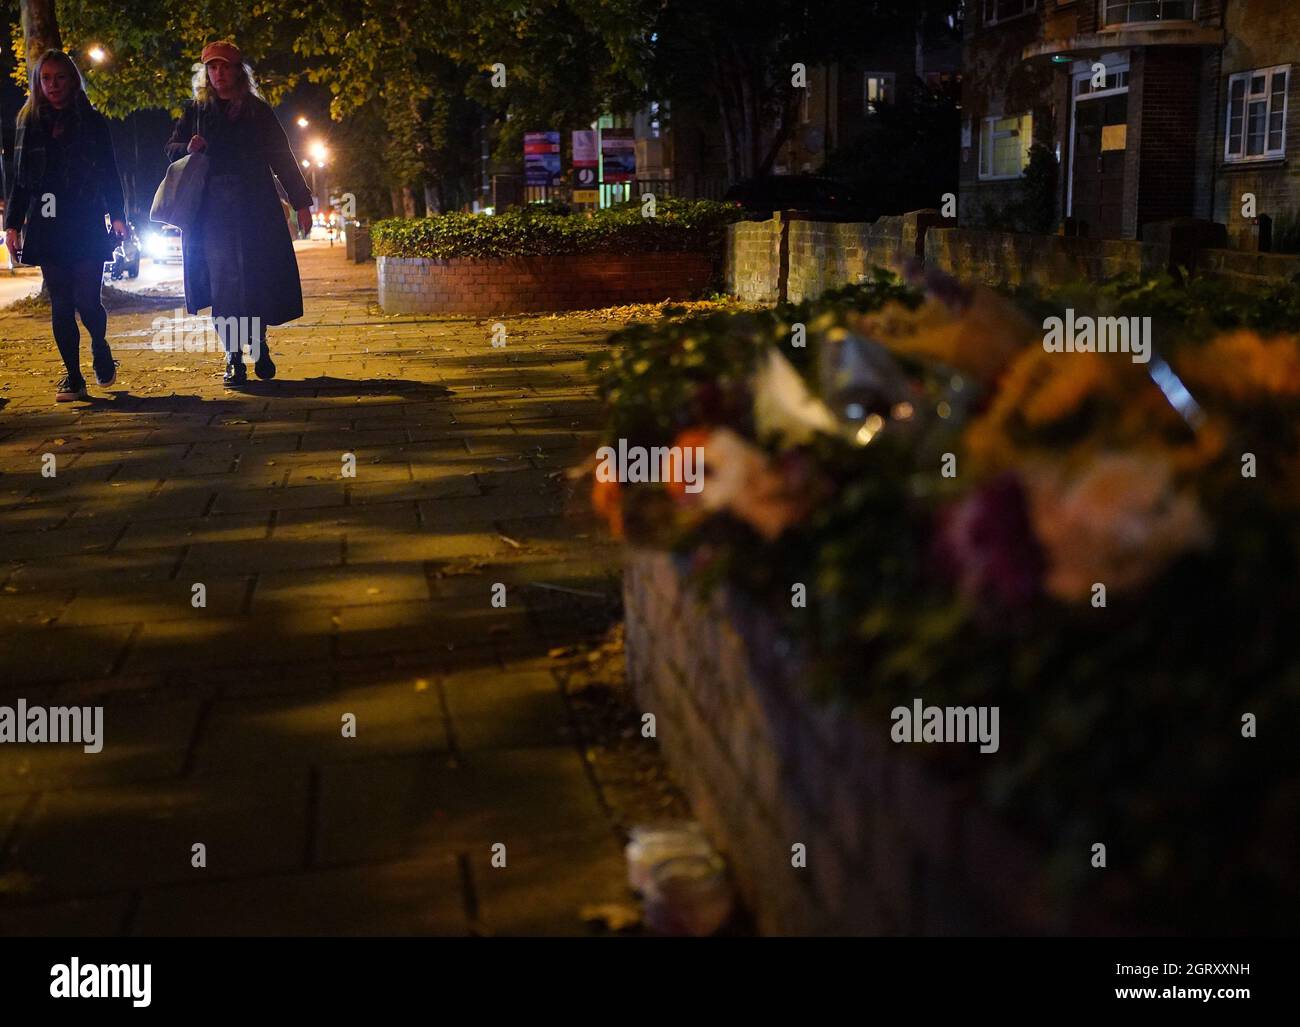 Two woman walking after dark past floral tributes to Sarah Everard on Poynders Road in Clapham, south London, close to where Sarah Everard was abducted from the street by being falsely arrested by police officer Wayne Couzens in March. Picture date: Friday October 1, 2021. Stock Photo